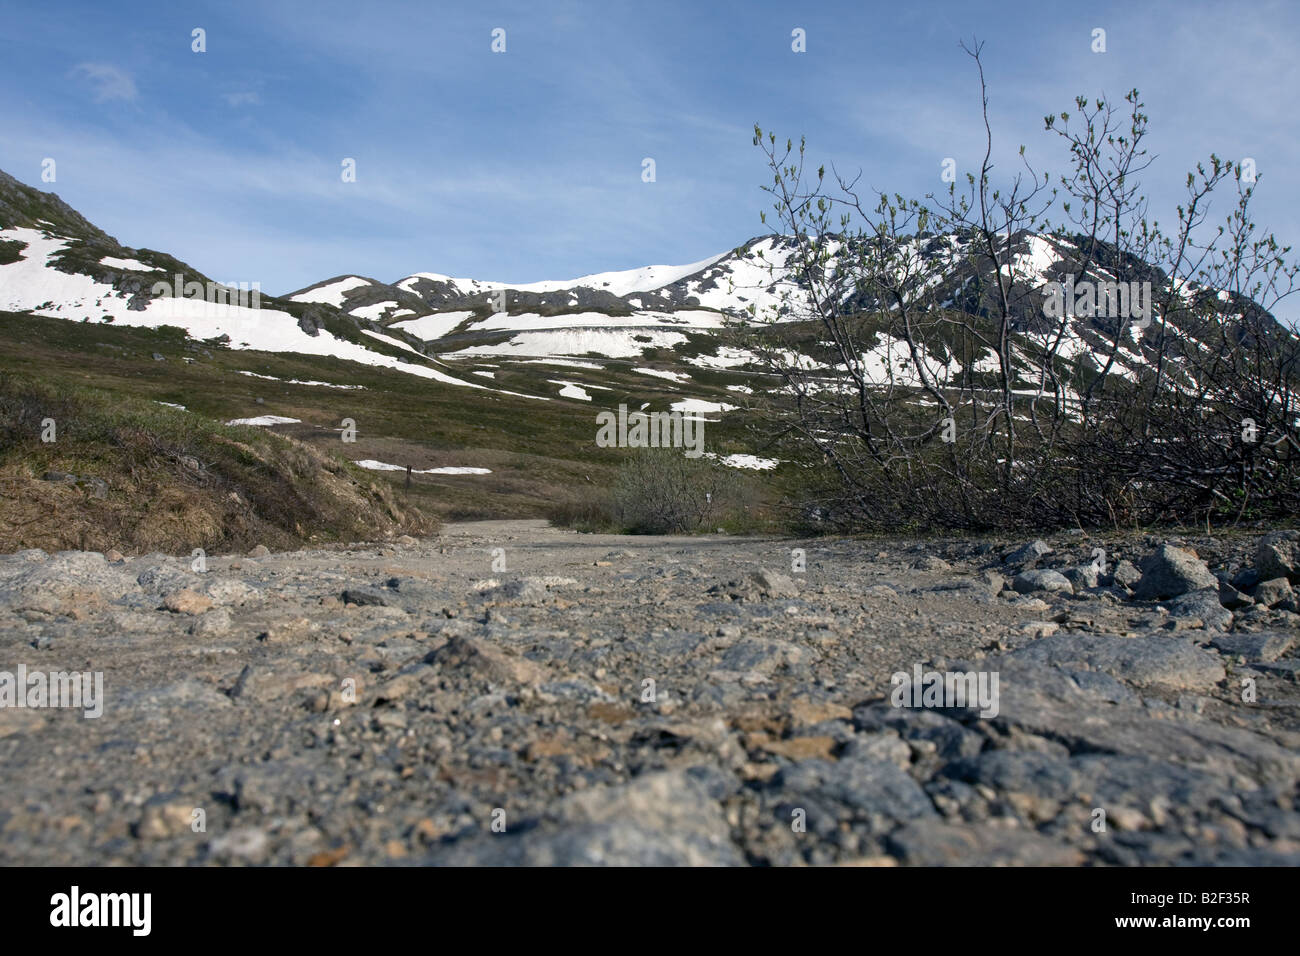 Gravel/Dirt road leading to partly snow covered mountains, Alaska. Stock Photo